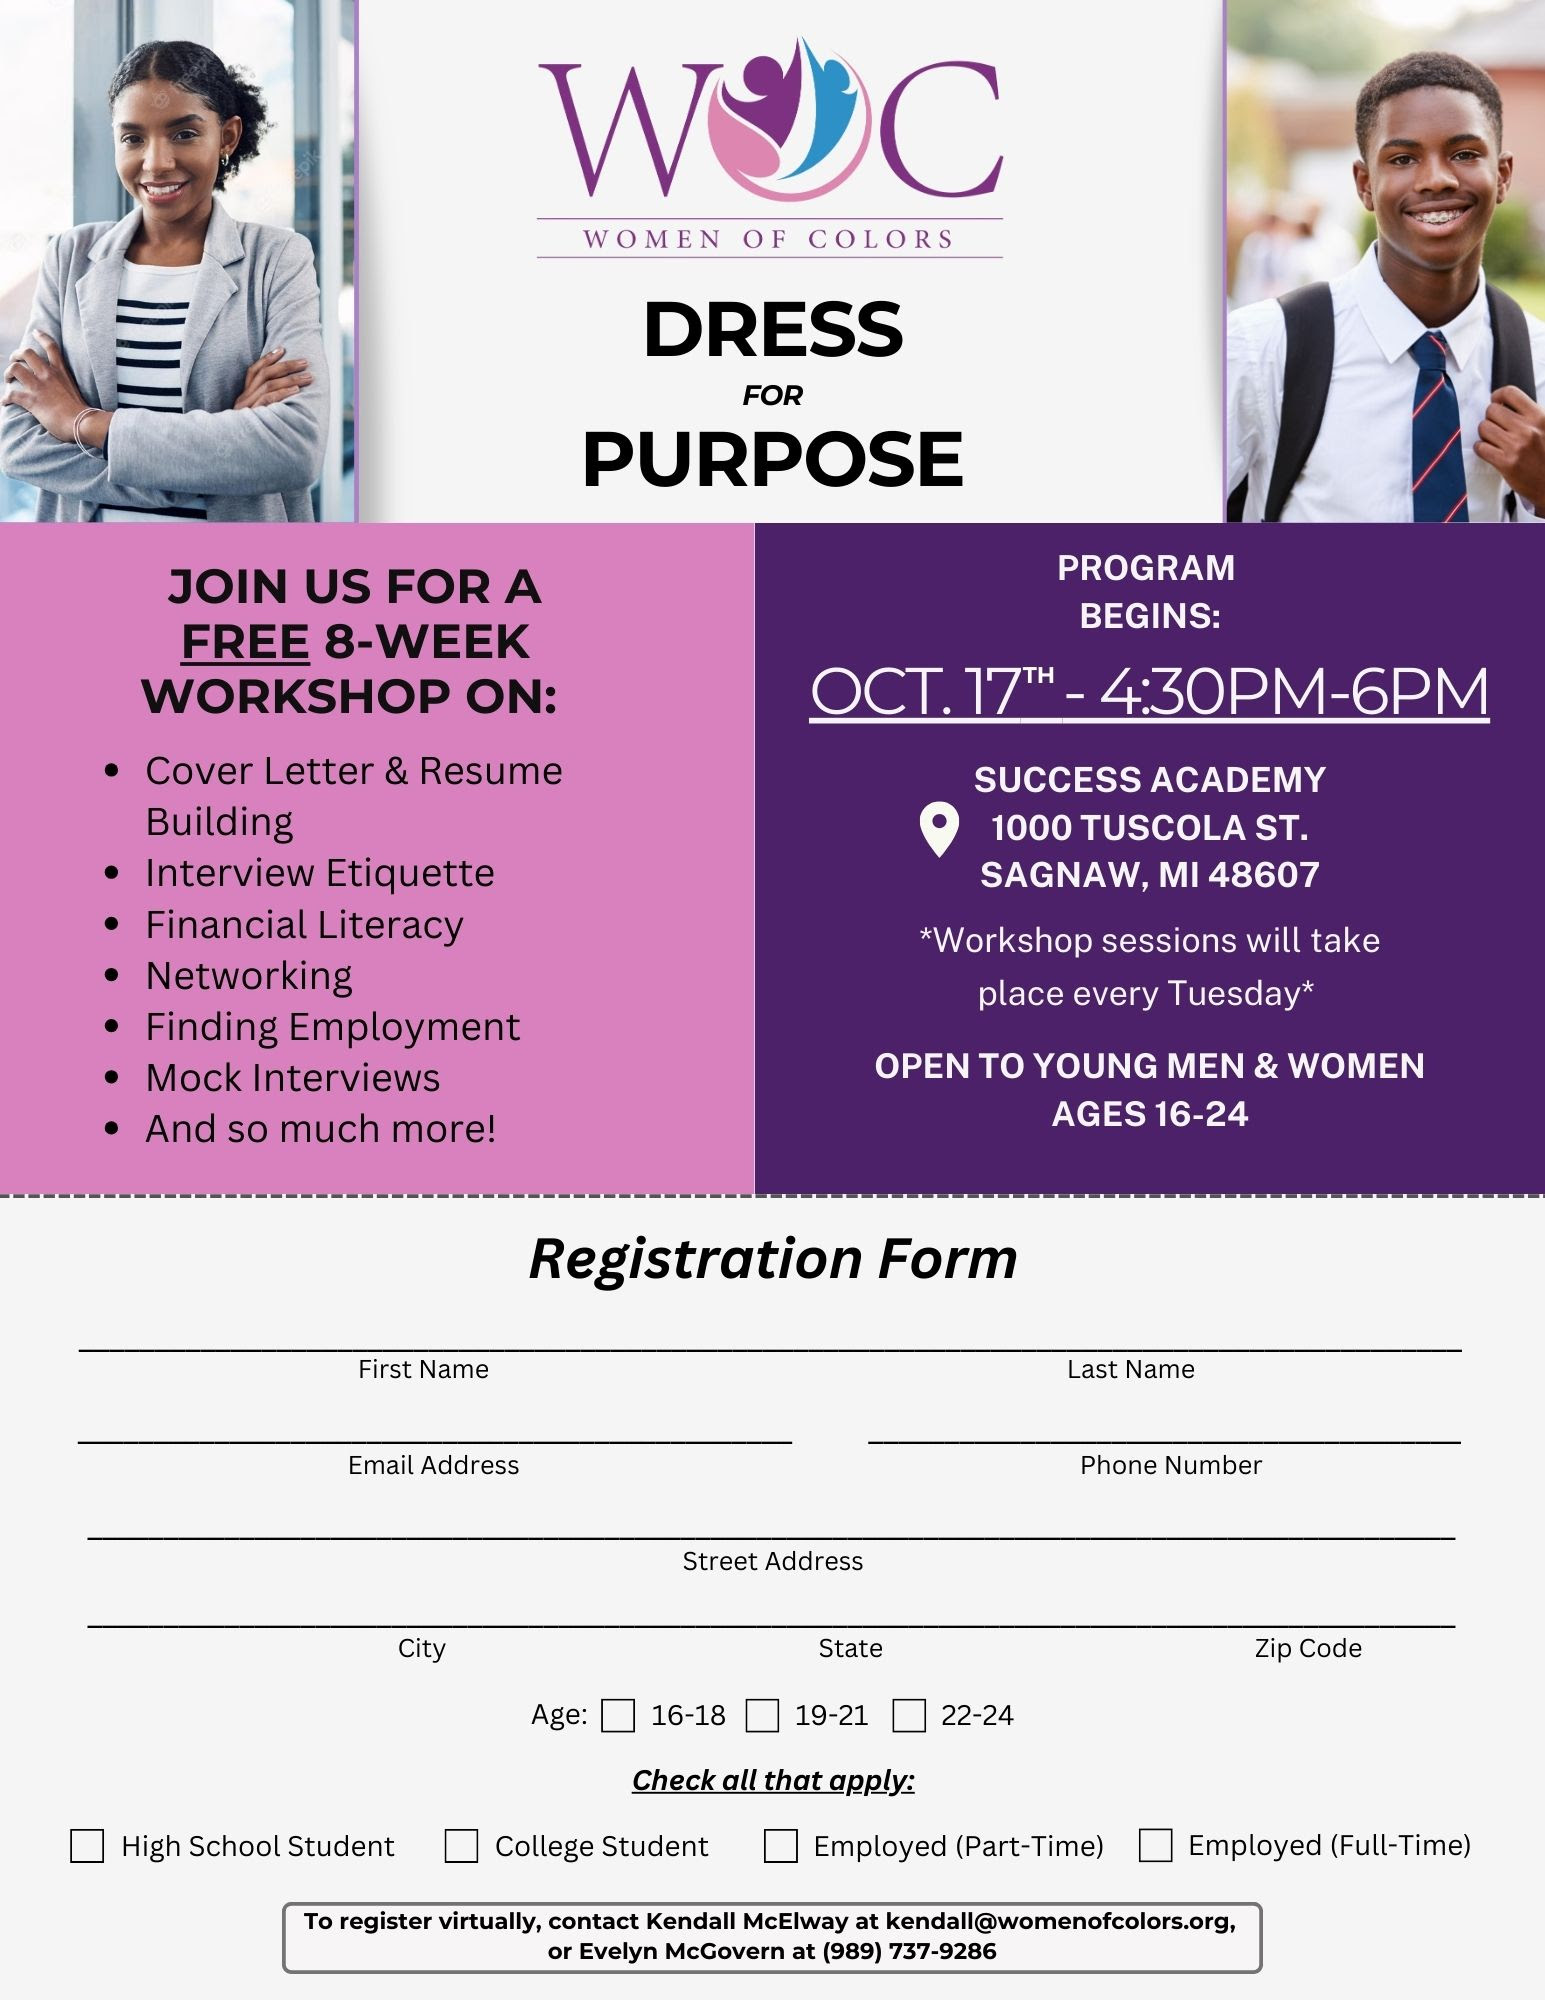 <h1 class="tribe-events-single-event-title">Women Of Colors presents “Dress With Purpose”</h1>